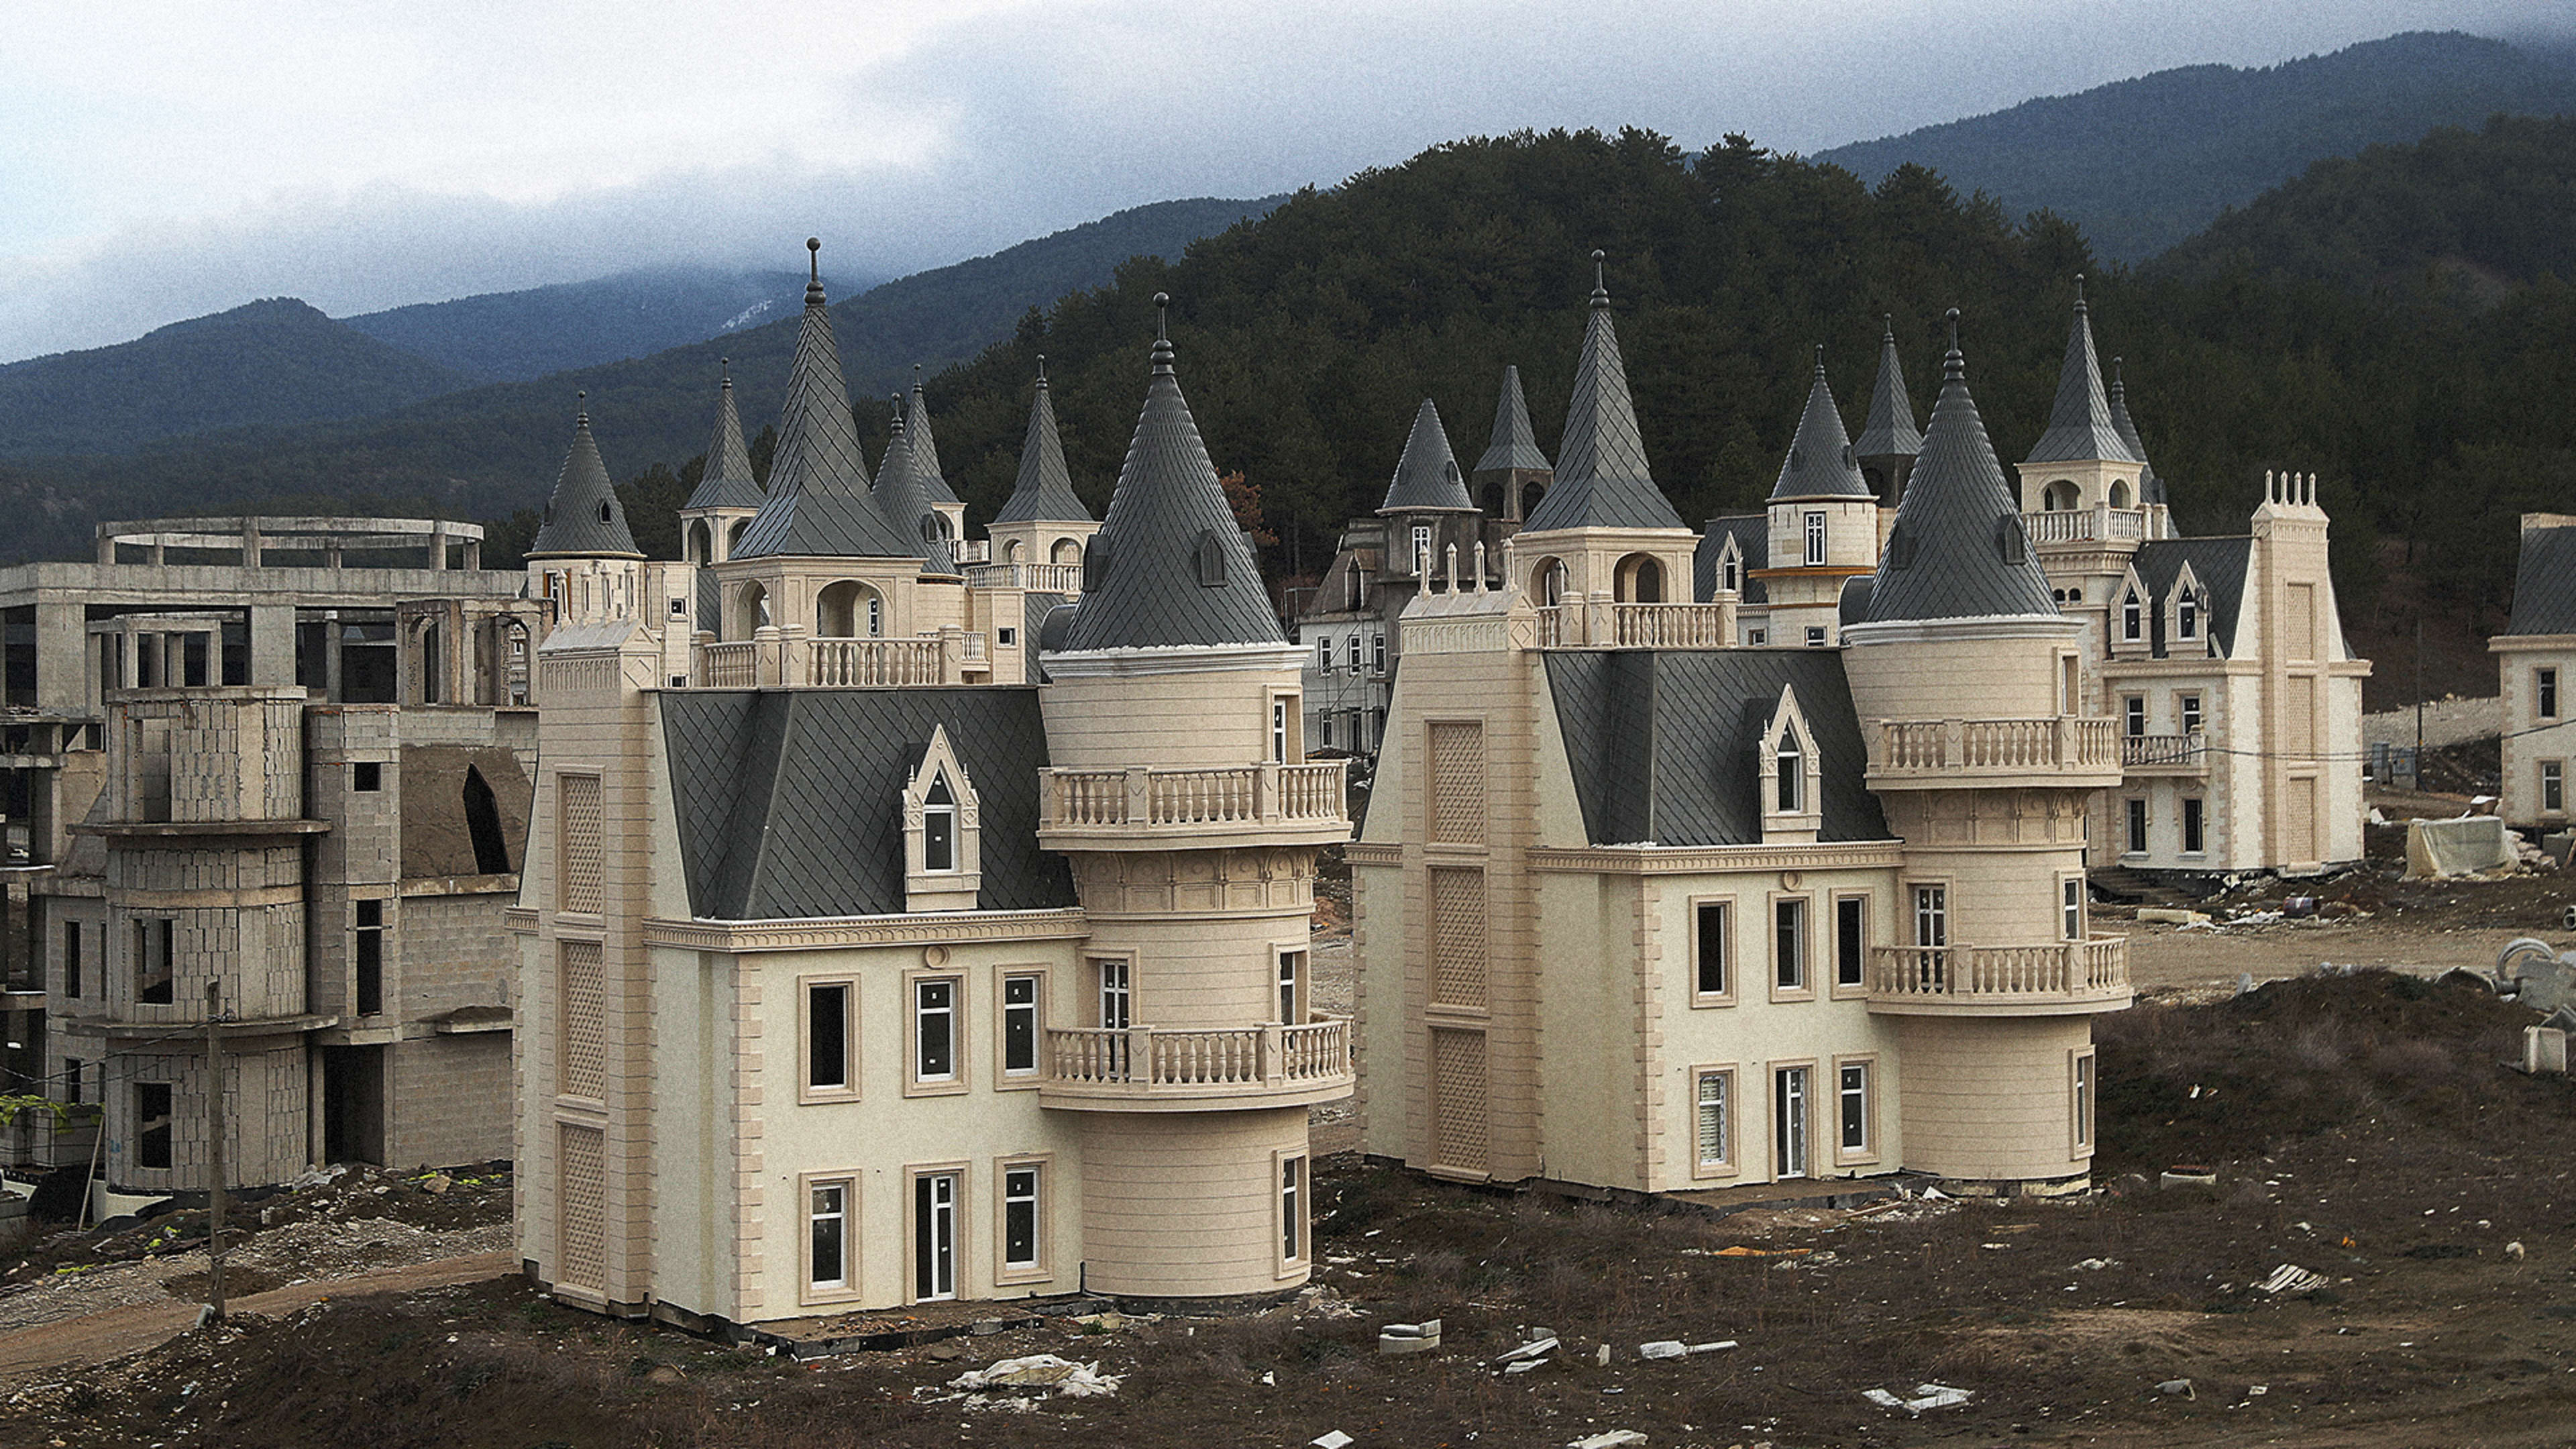 See an eerie ghost town of castles, created by Turkey’s recession